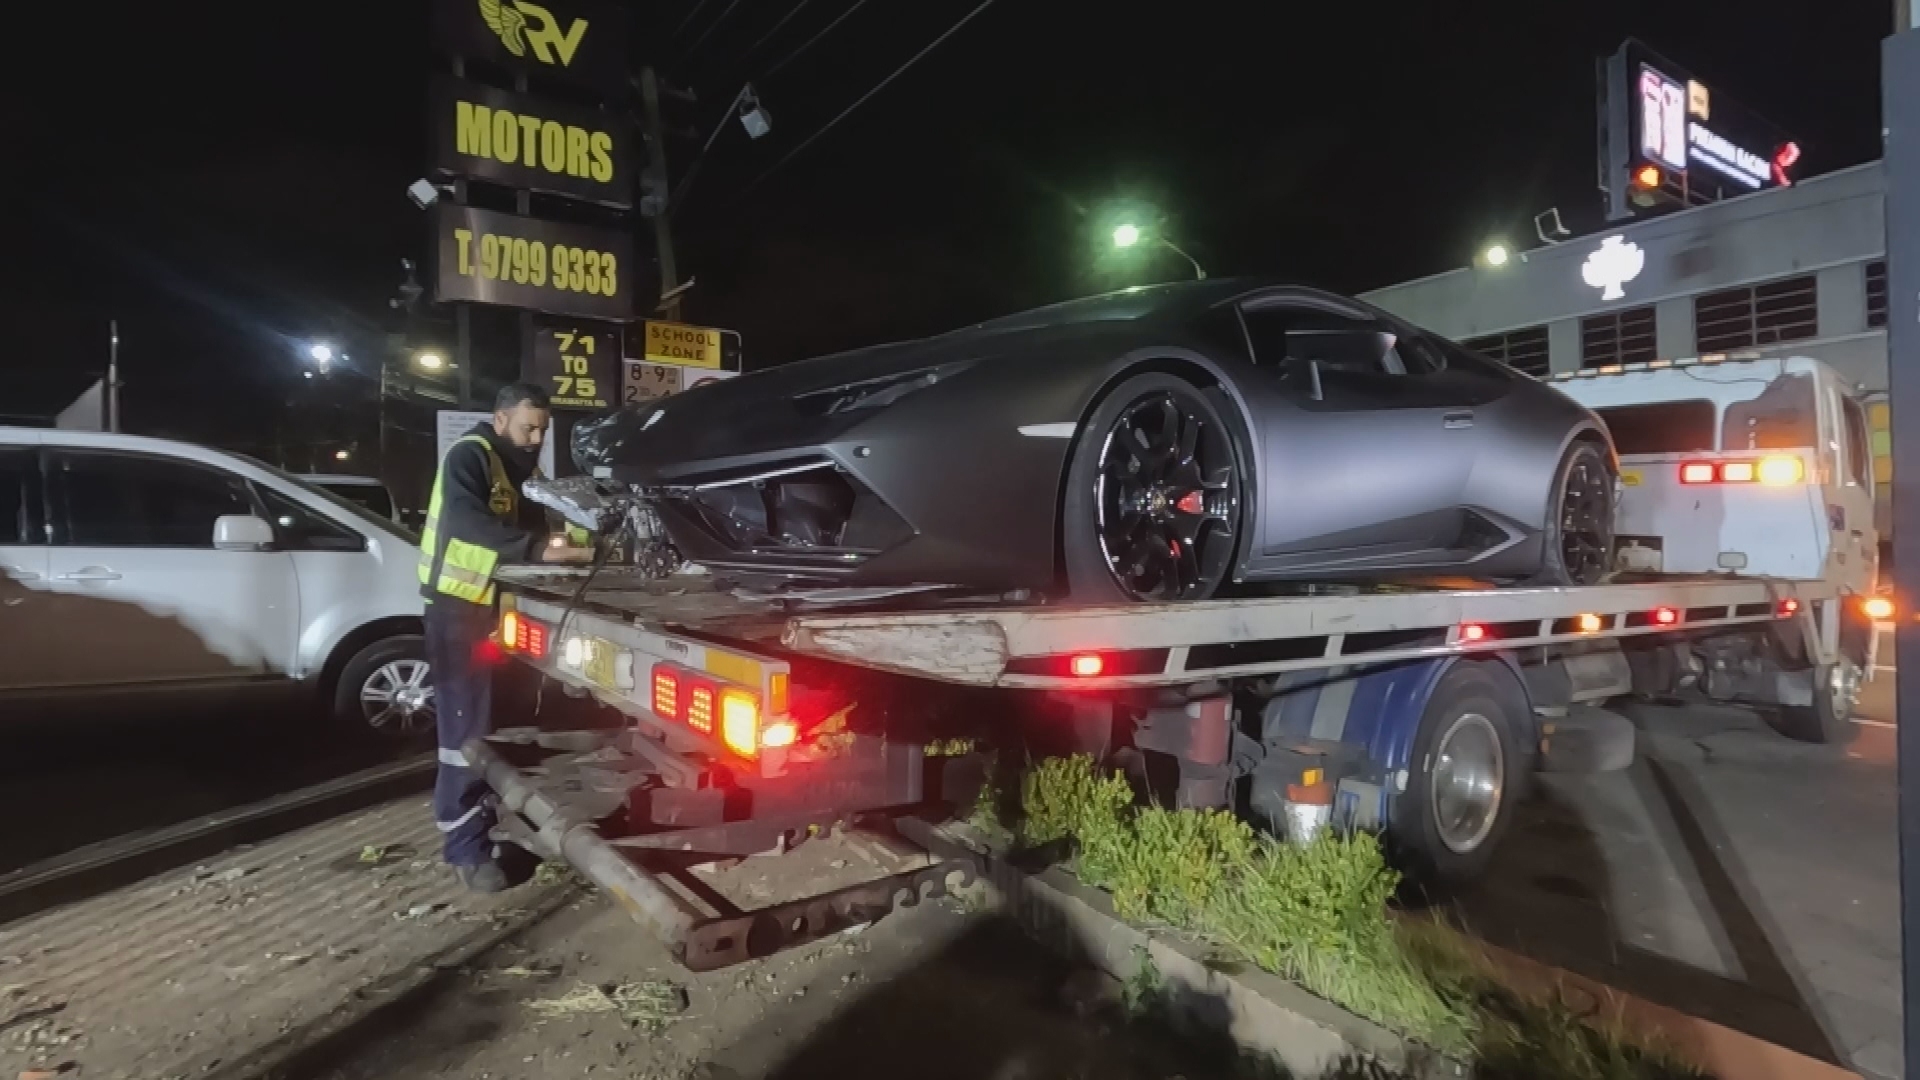 Police are investigating after a rented black Lamborghini crashed into a car yard in Sydney overnight.